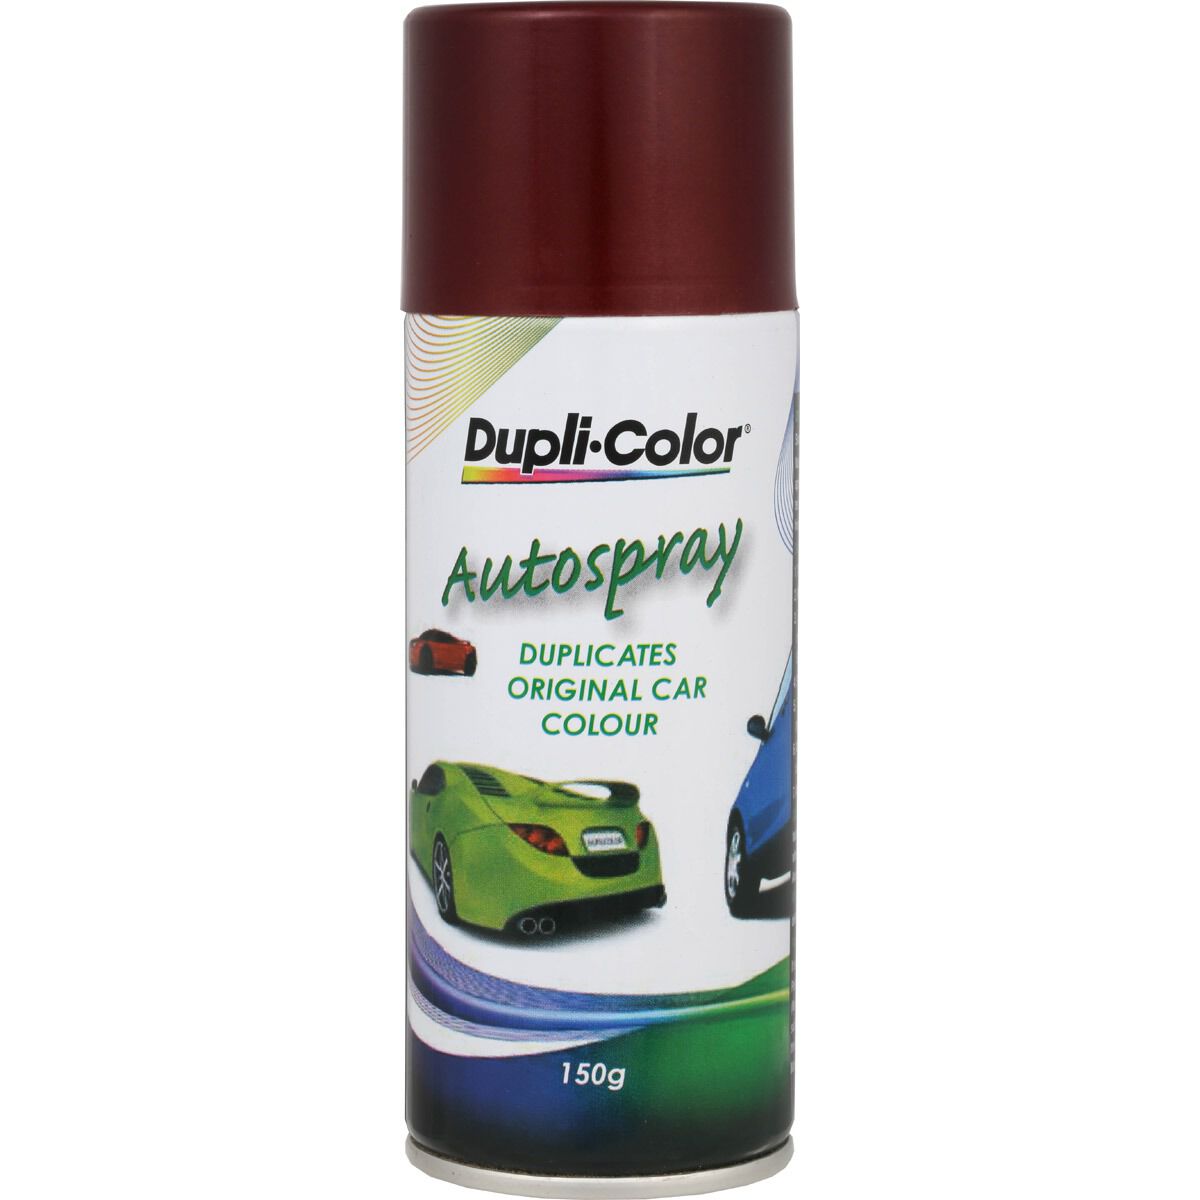 Dupli-Color Touch-Up Paint Ford Barossa Red, DSF01 - 150g, , scaau_hi-res